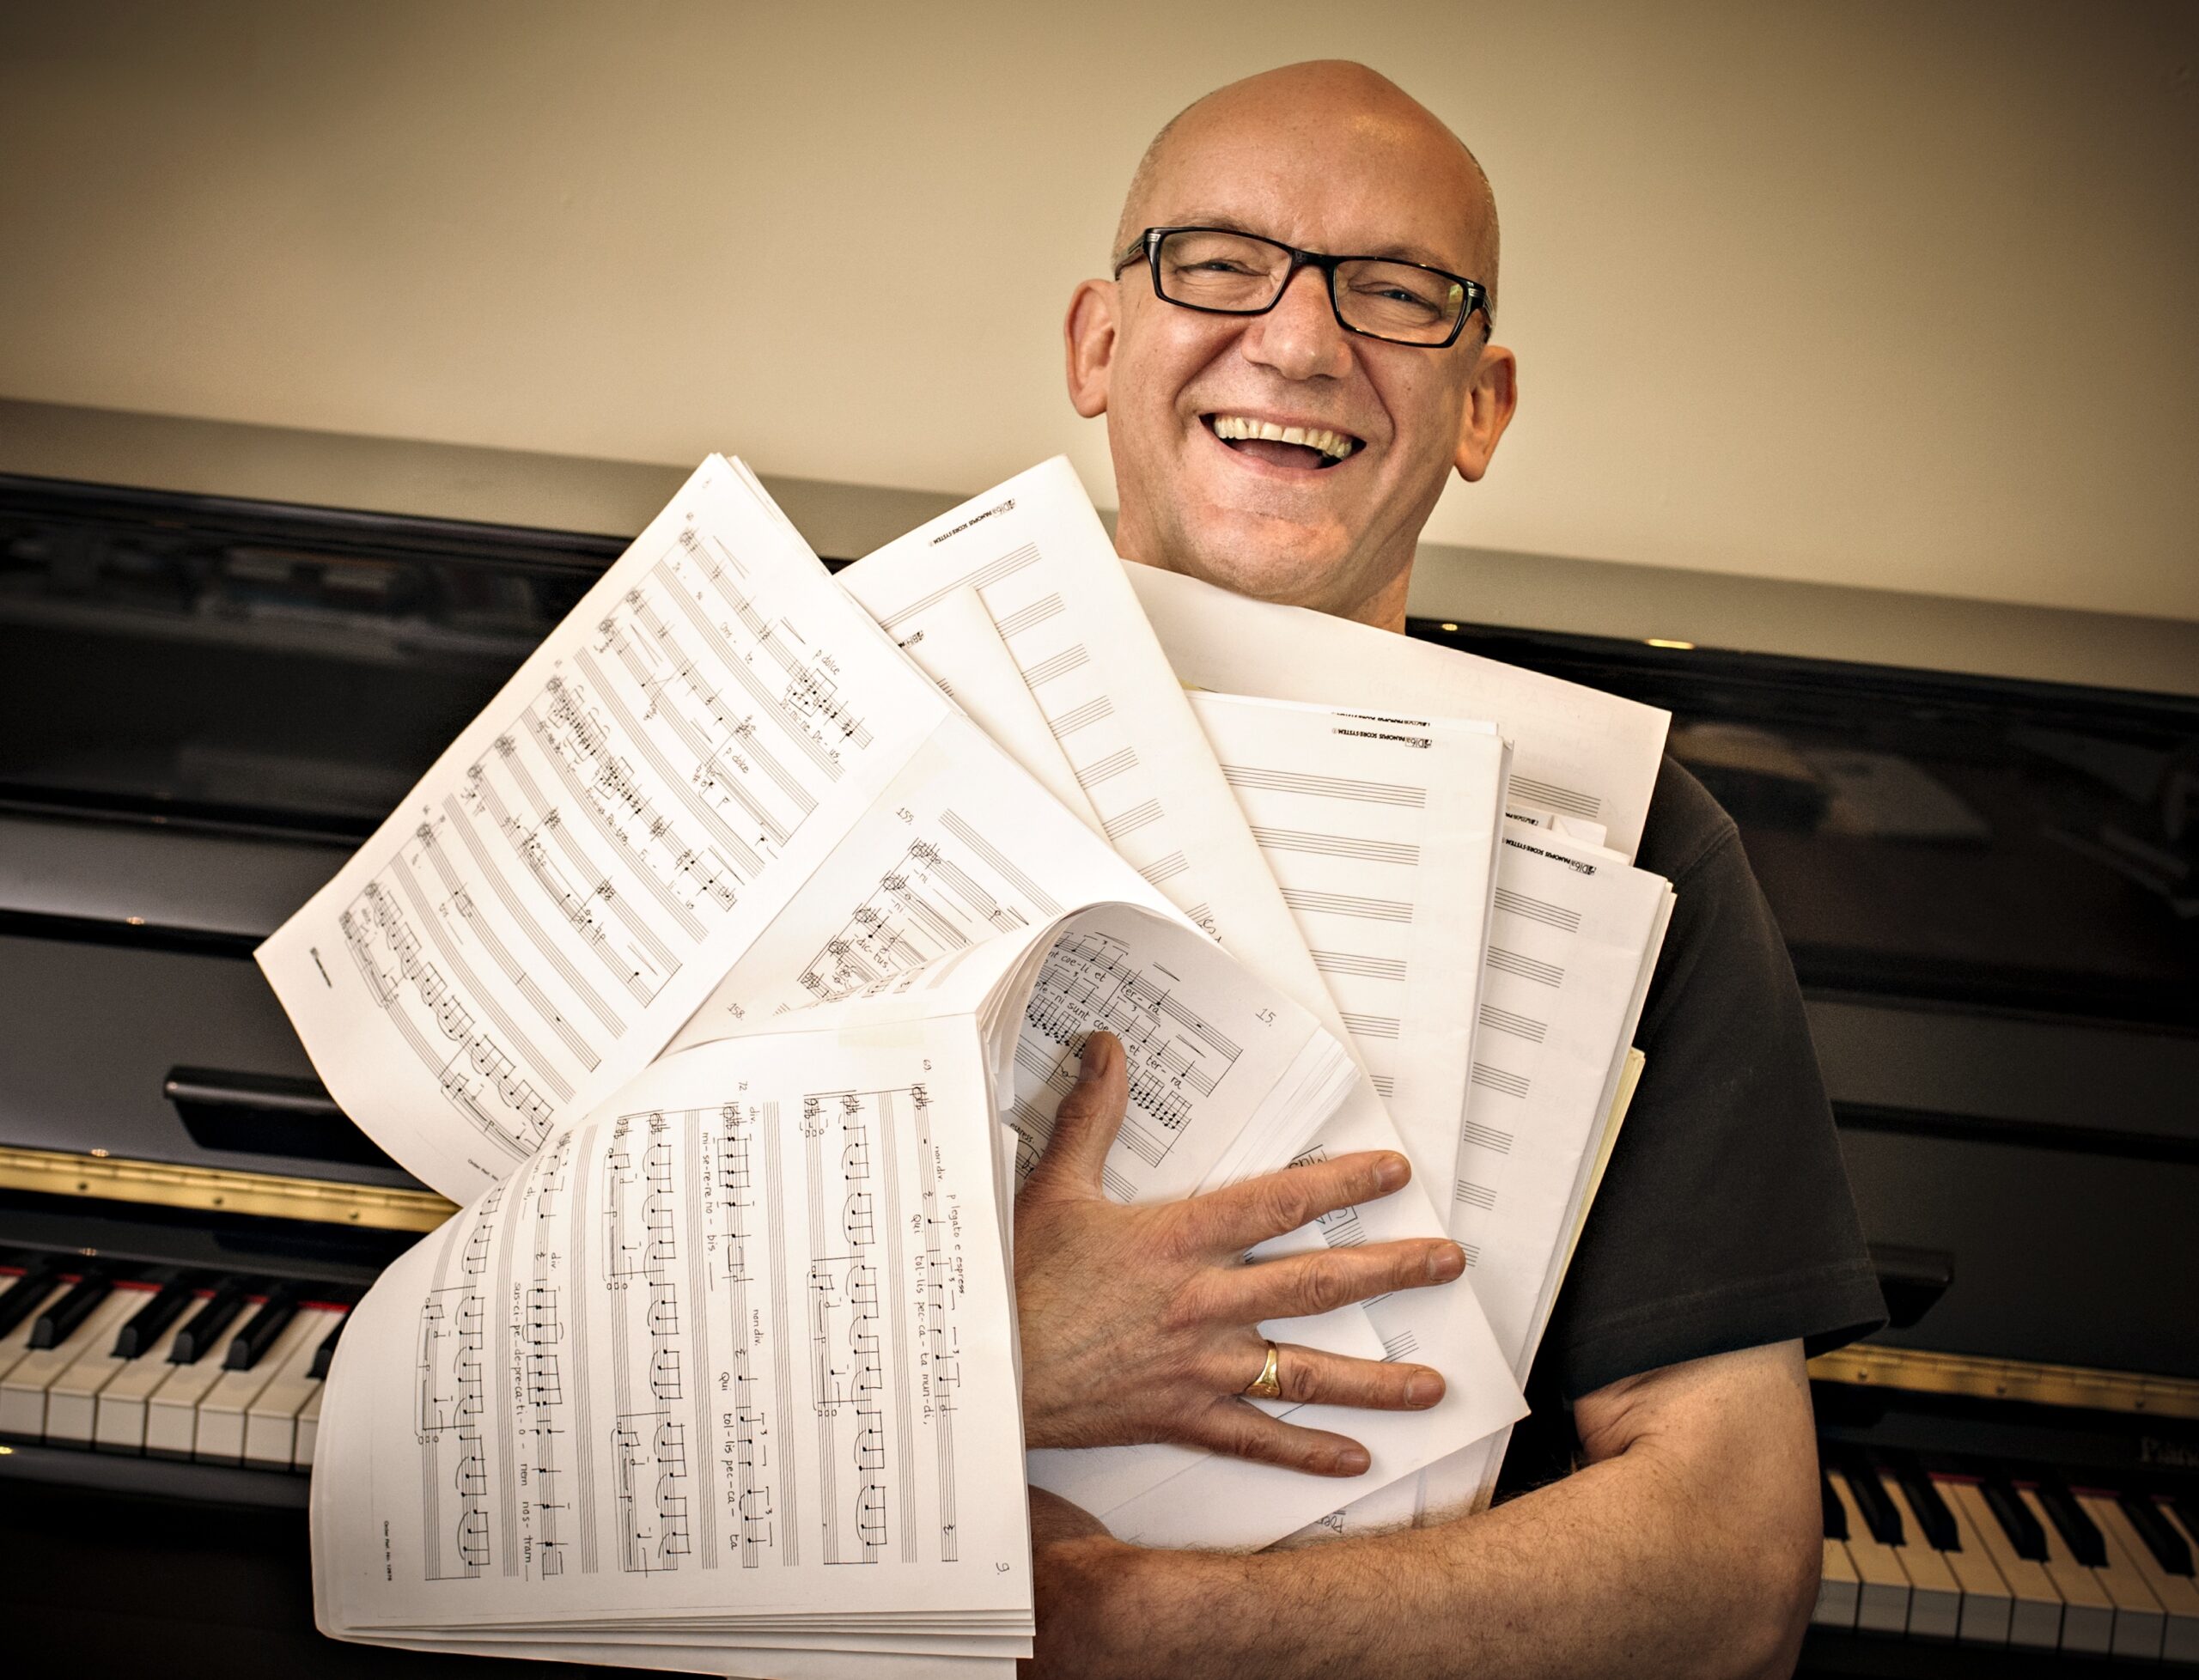 Broadly smiling bald man wearing dark-rimmed glasses, with his arms full of a tumble of sheets of music, like he's hugging them. Black piano, with keys showing, and cream wall behind him. (Composer Bob Chilcott)